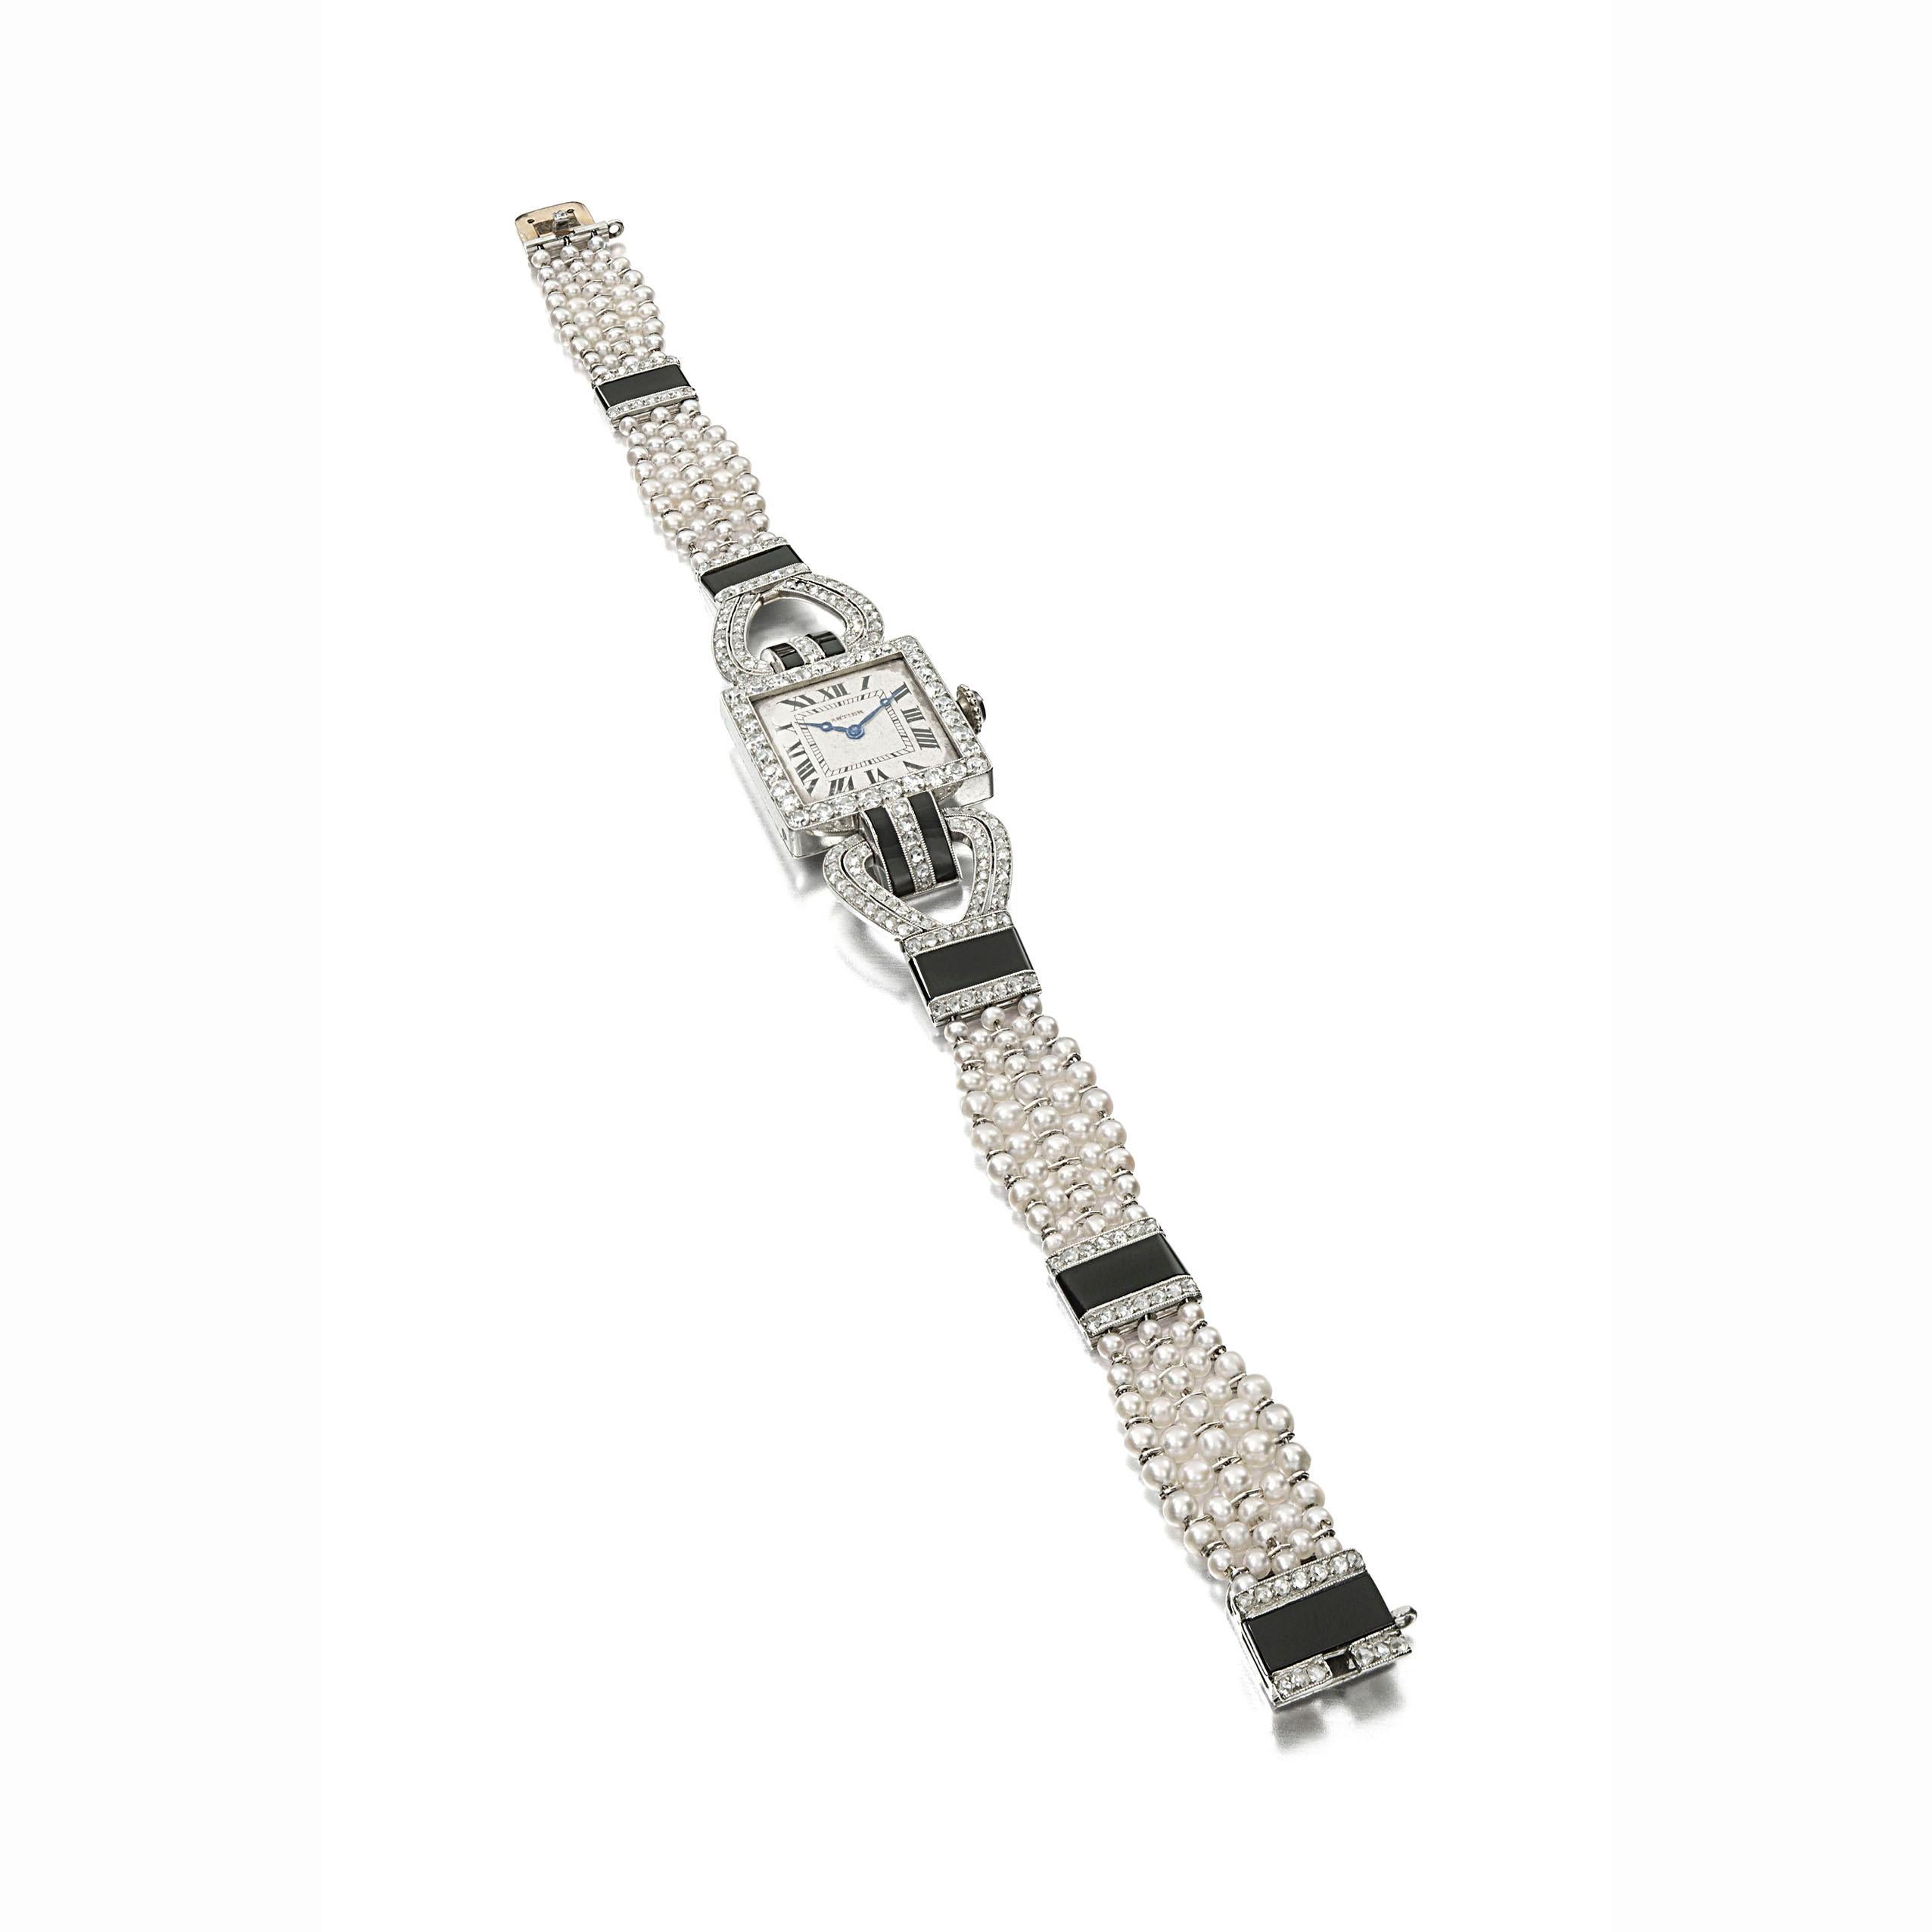 Art Deco Diamond, Pearl, and Onyx Watch by Cartier, Paris, circa 1920 

A watch with a square, cream-colored dial with Roman numerals and blued steel hands within a diamond border, a rose-cut diamond winder, onyx and diamond arched shoulders, and